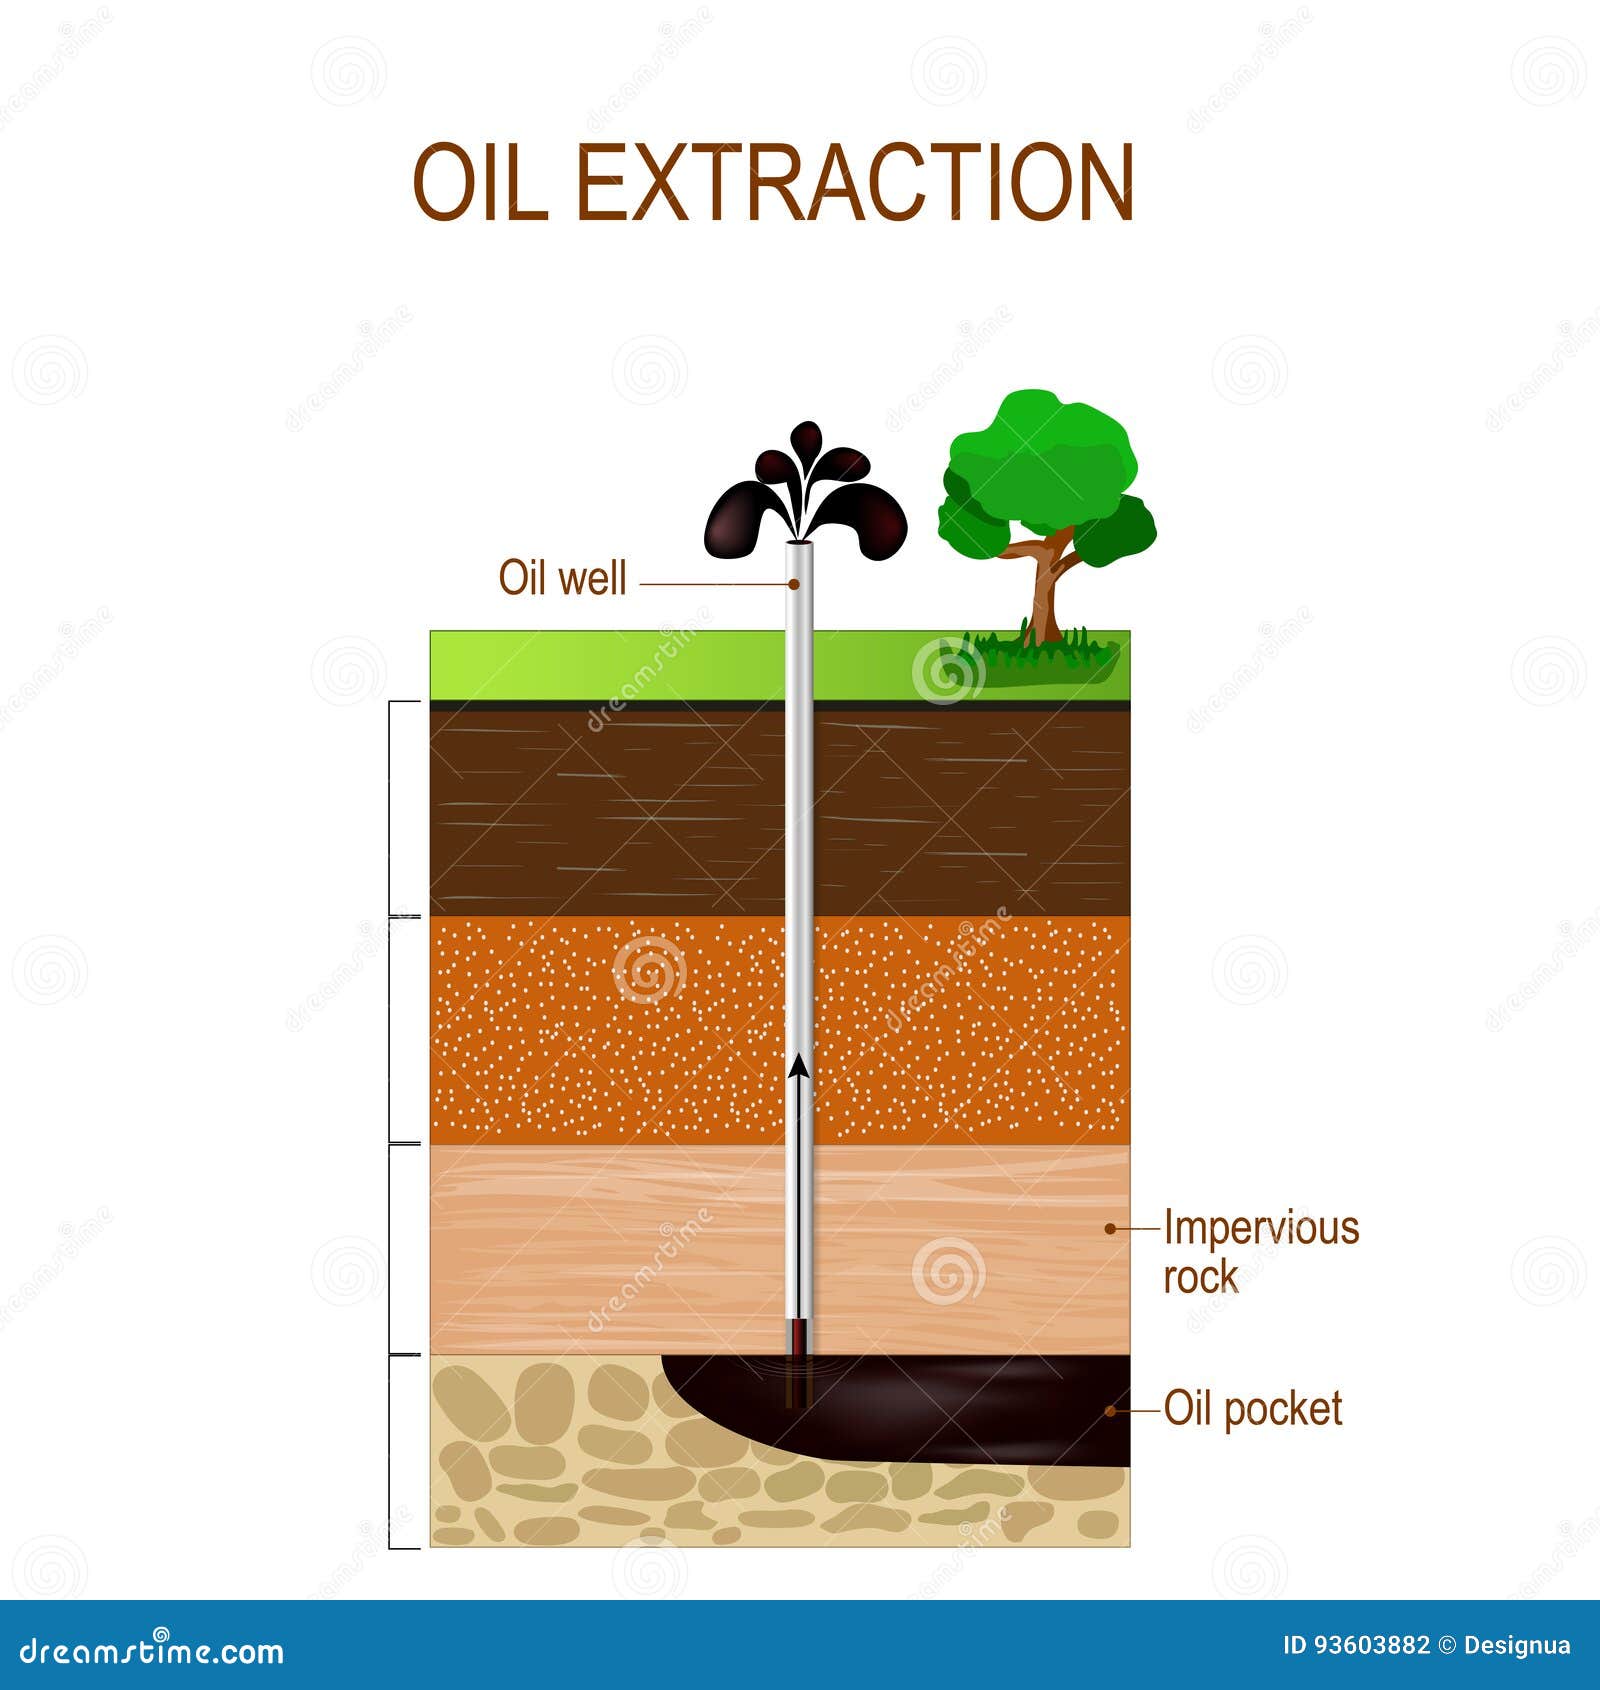 oil extraction and soil layers